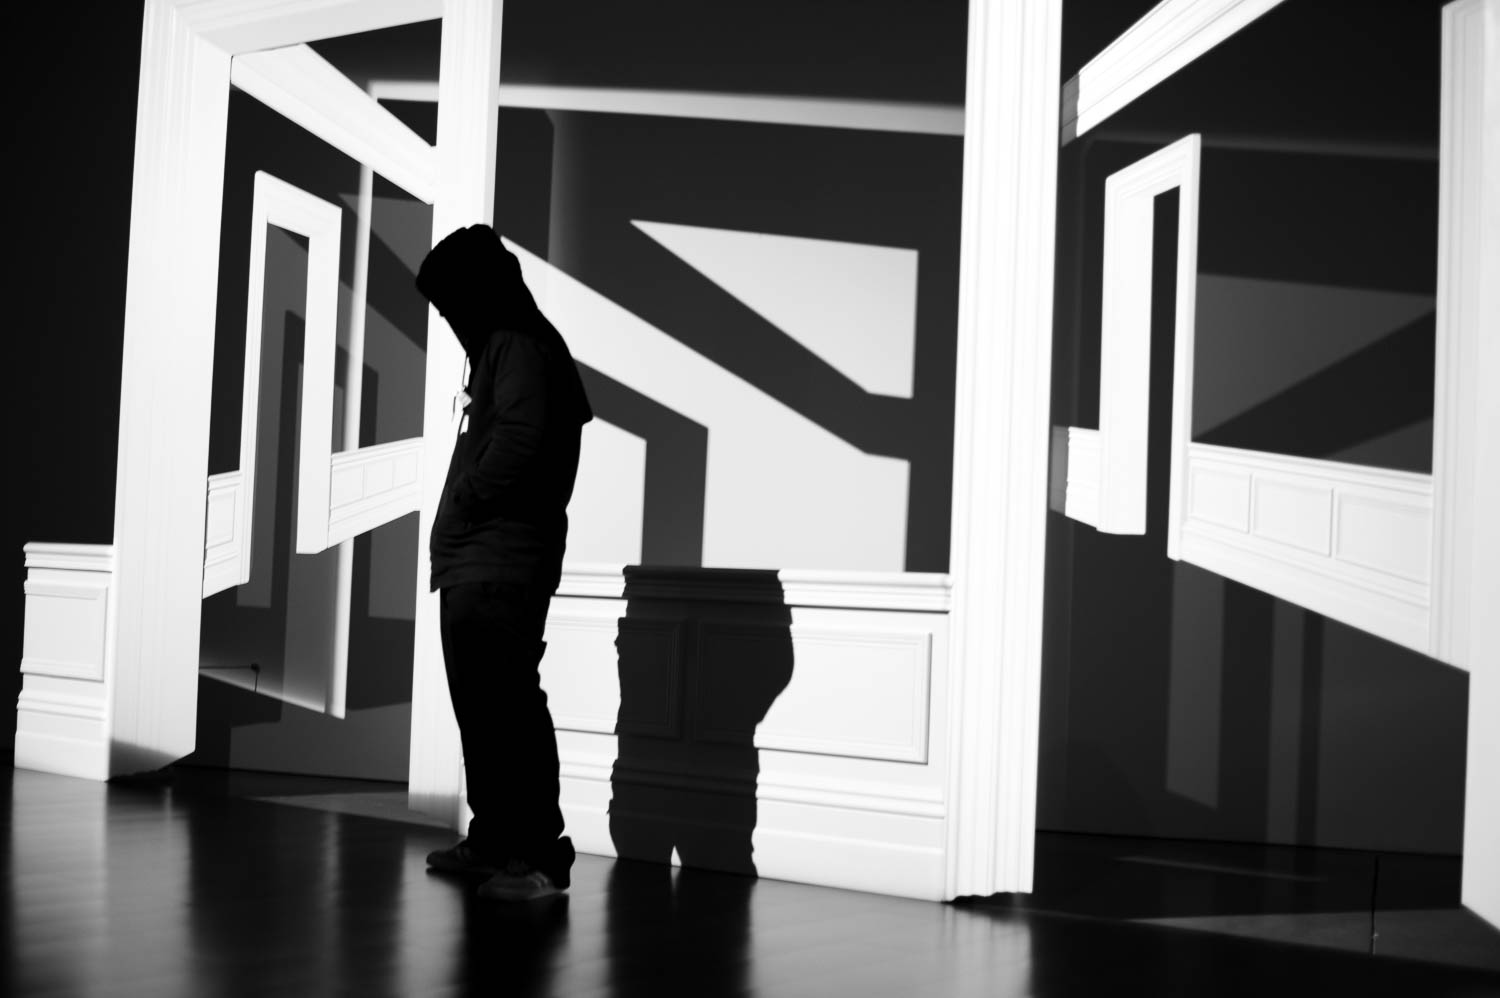 A figure stands in front of an art exhibit at ICA Boston with harsh shadows